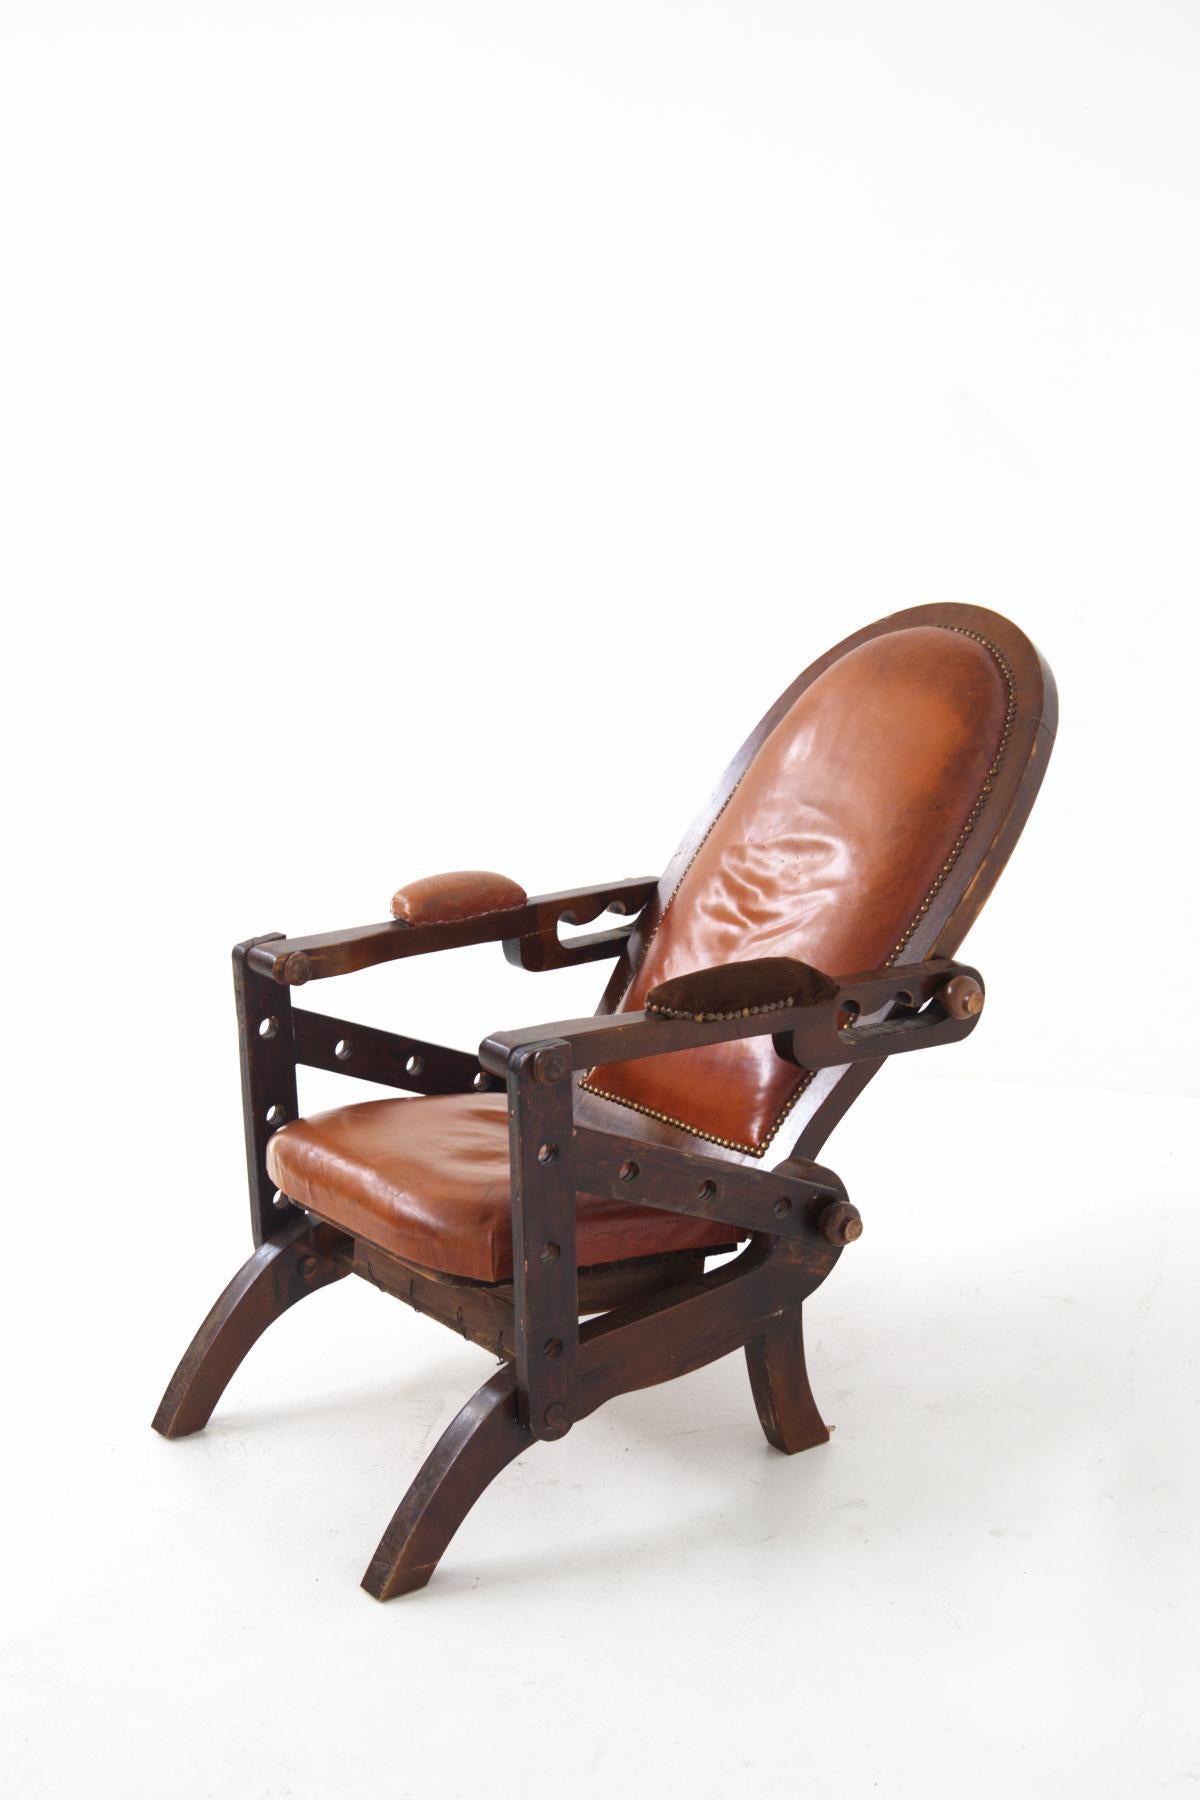 Italian Rustic Style Leather and Wood Armchair For Sale 3